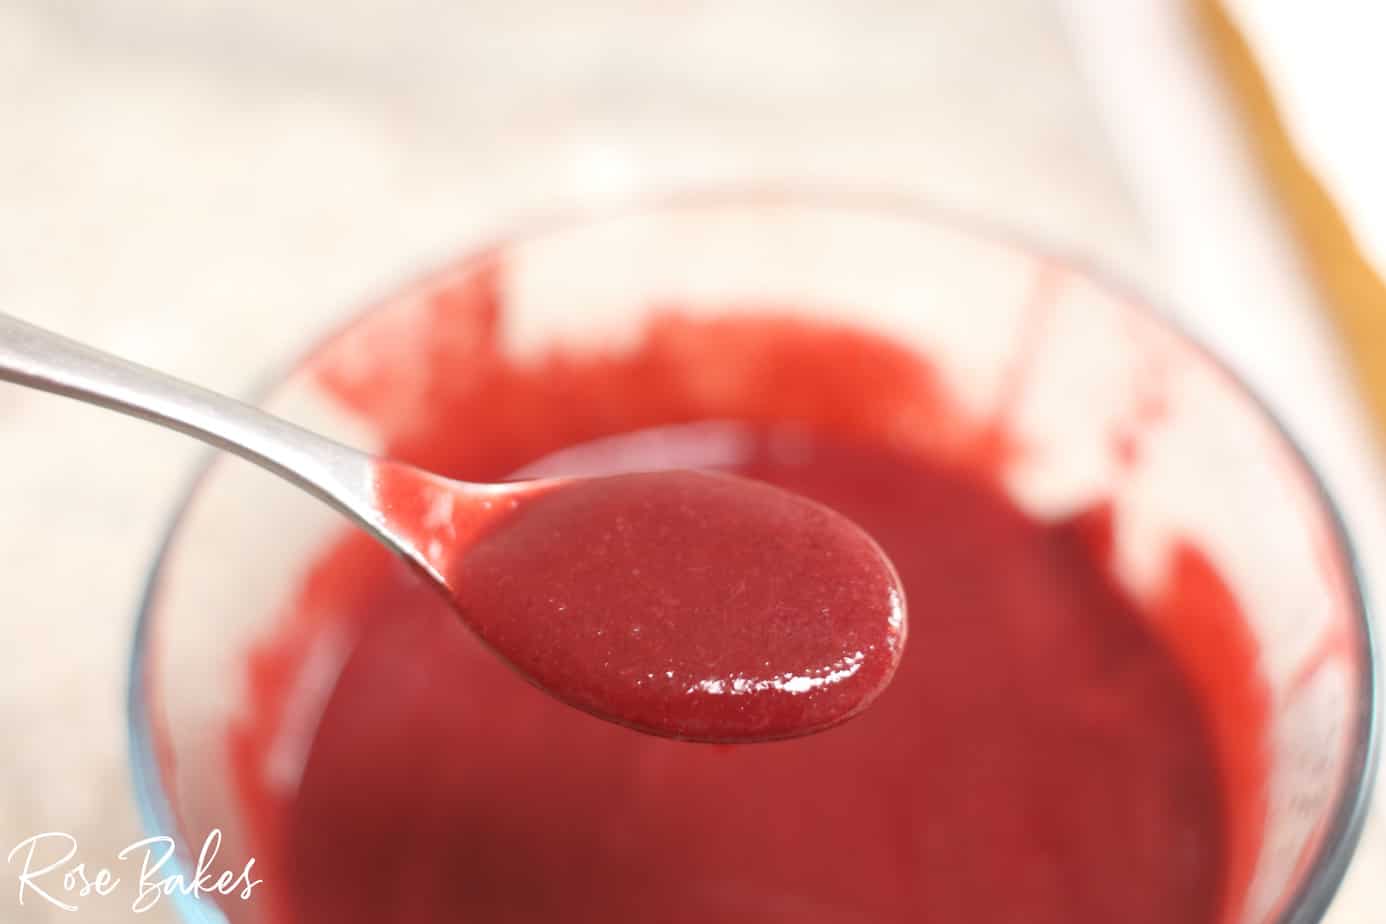 Spoonful of raspberry filling